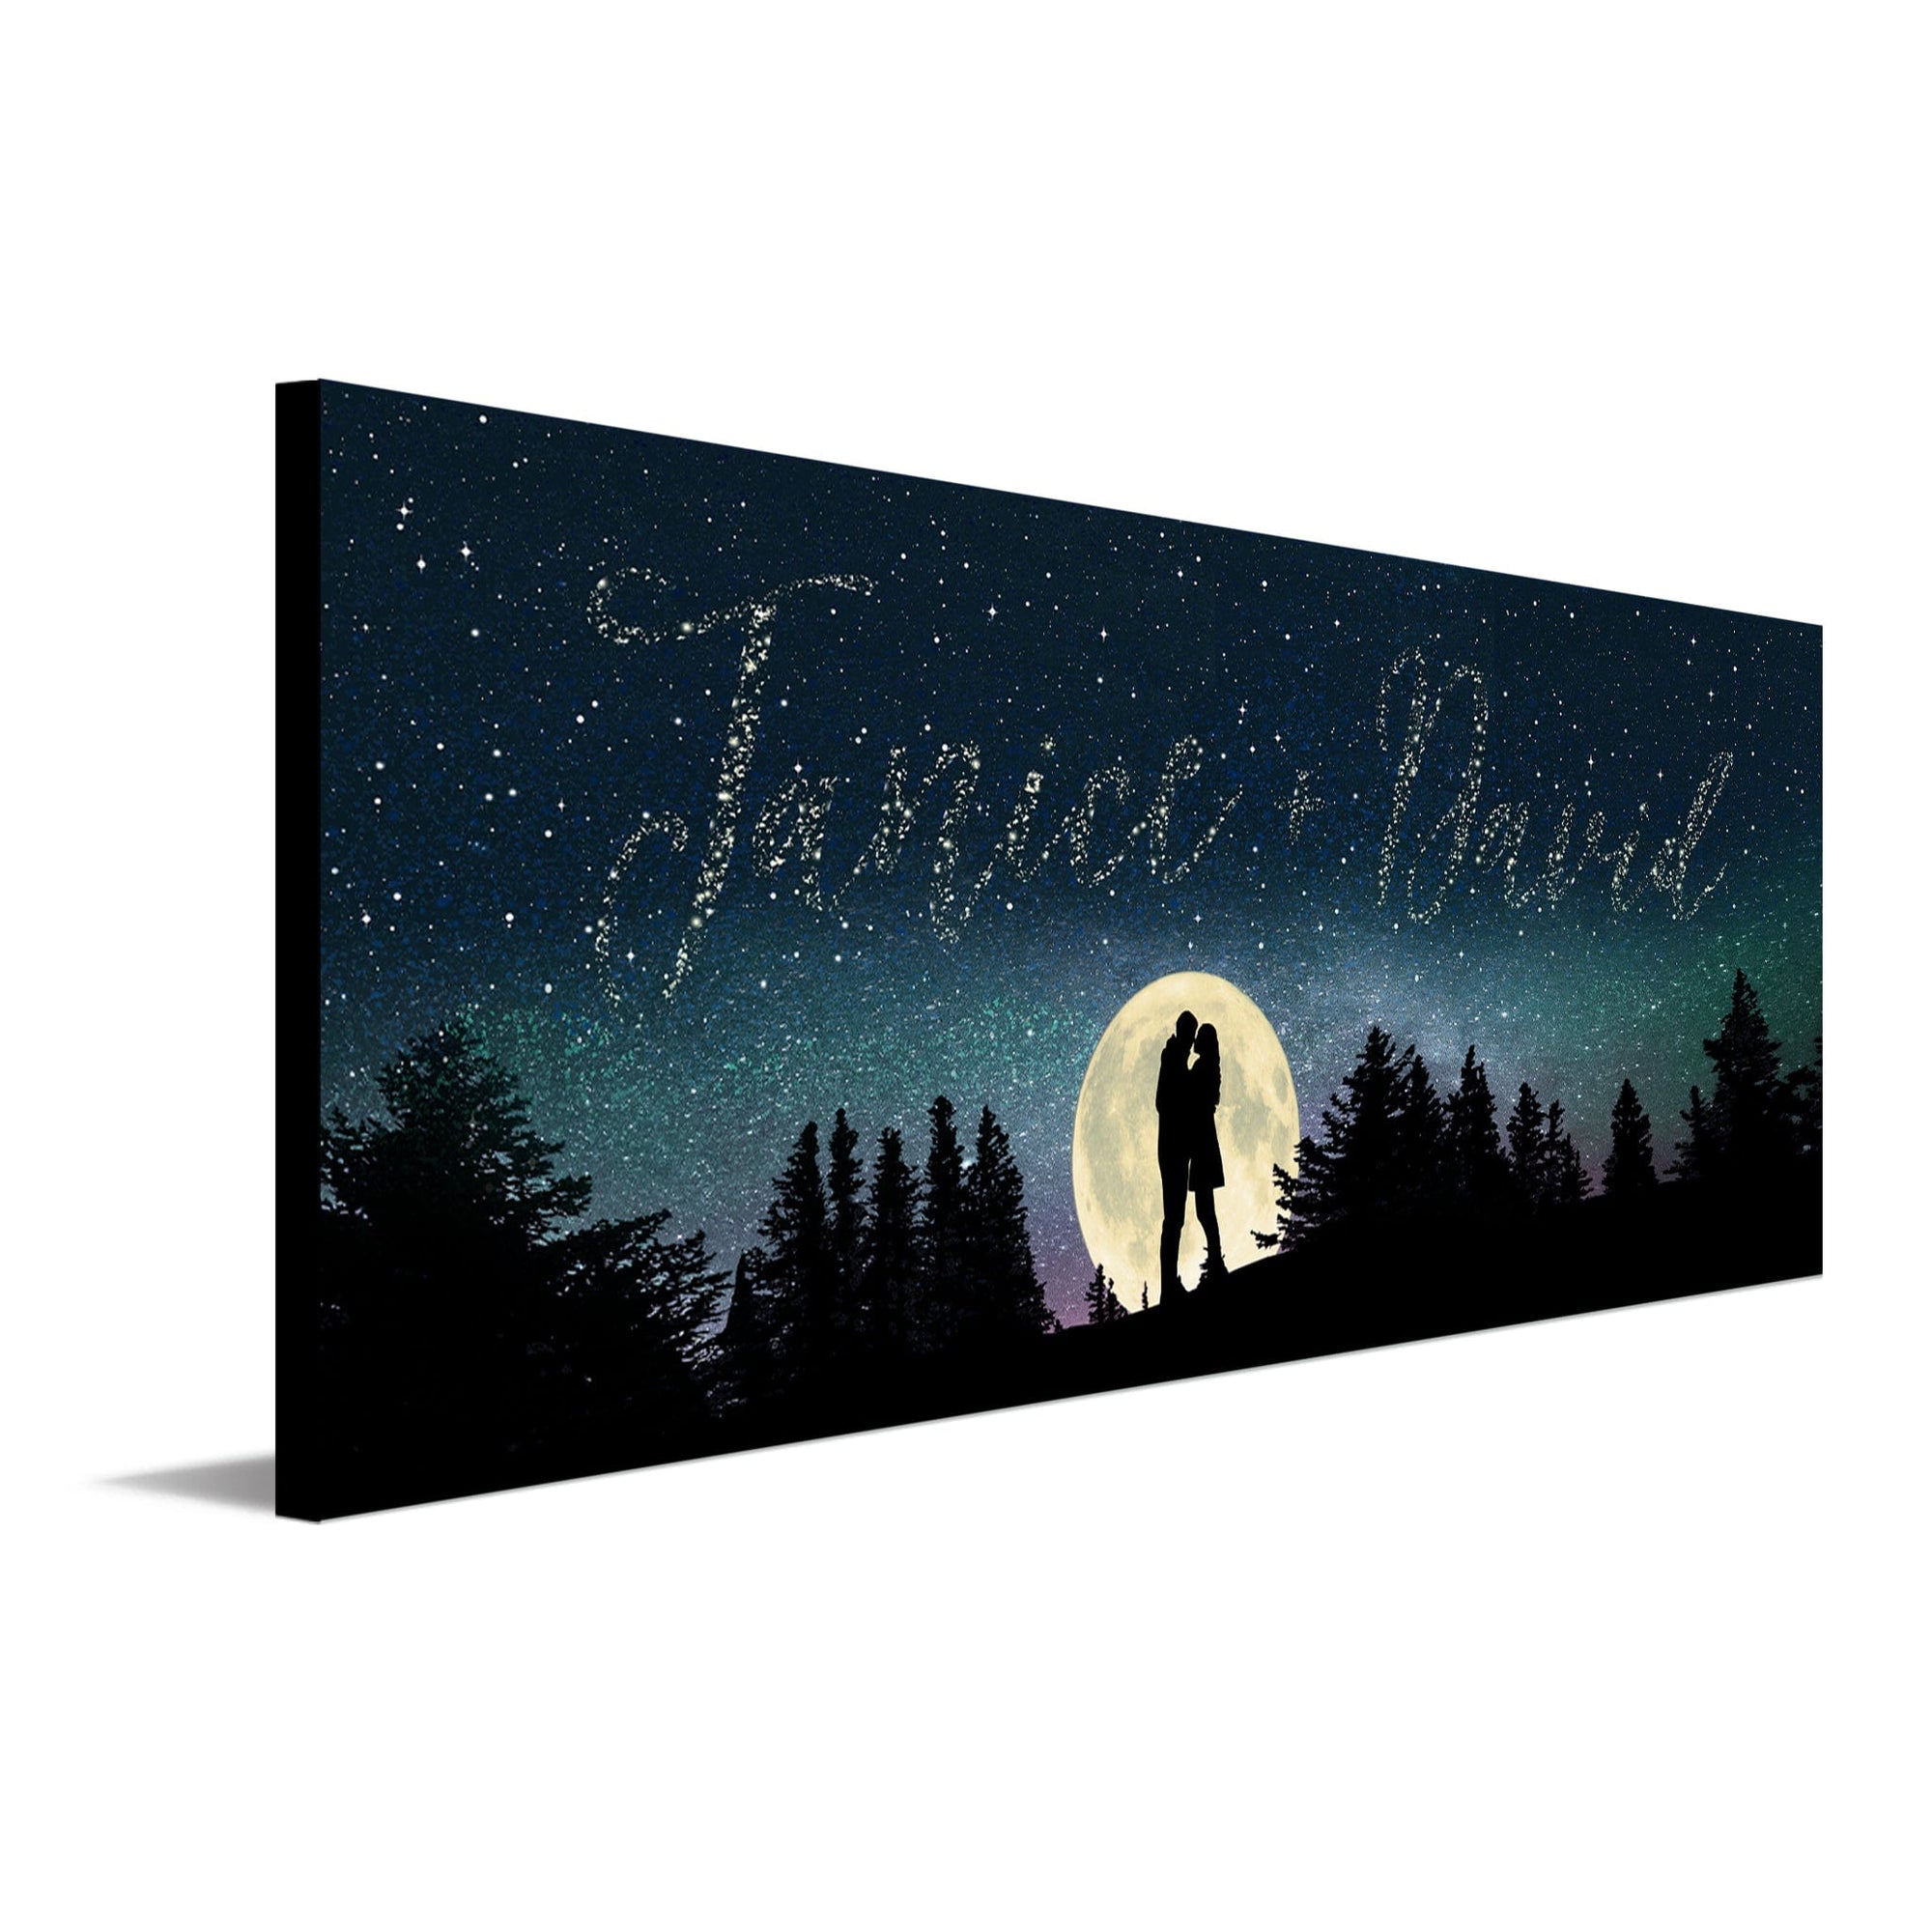 Written in the stars - romantic personalized gift from Personal Prints